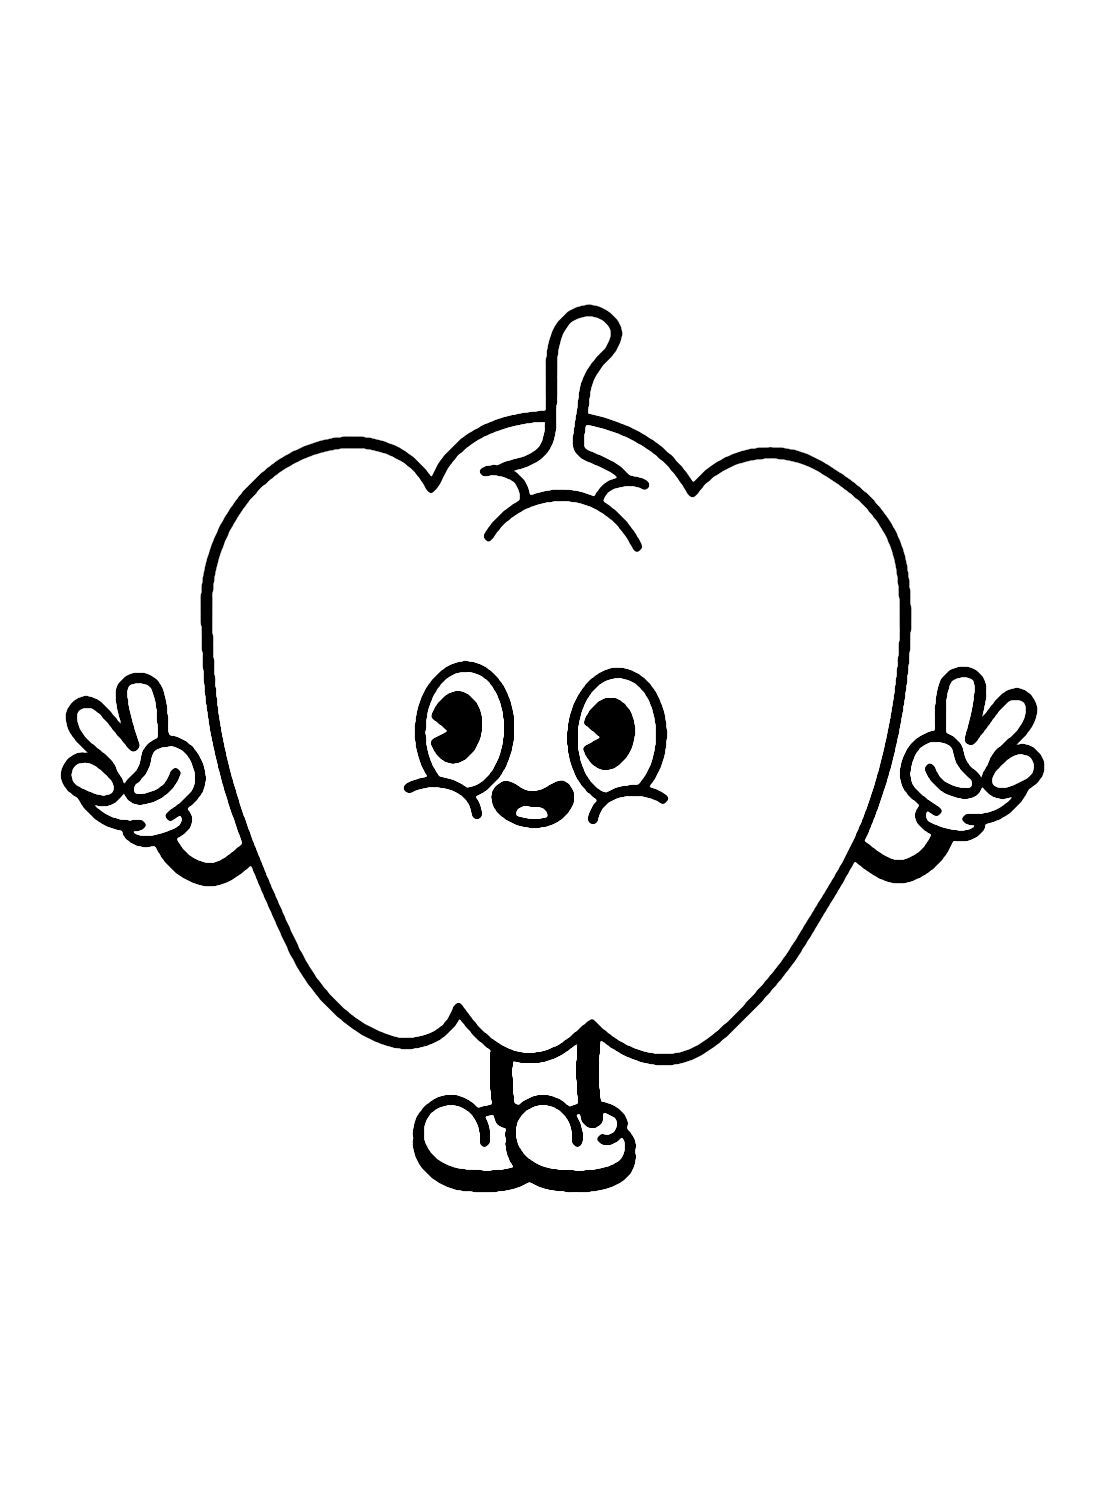 Bell Pepper for Kids Coloring Page